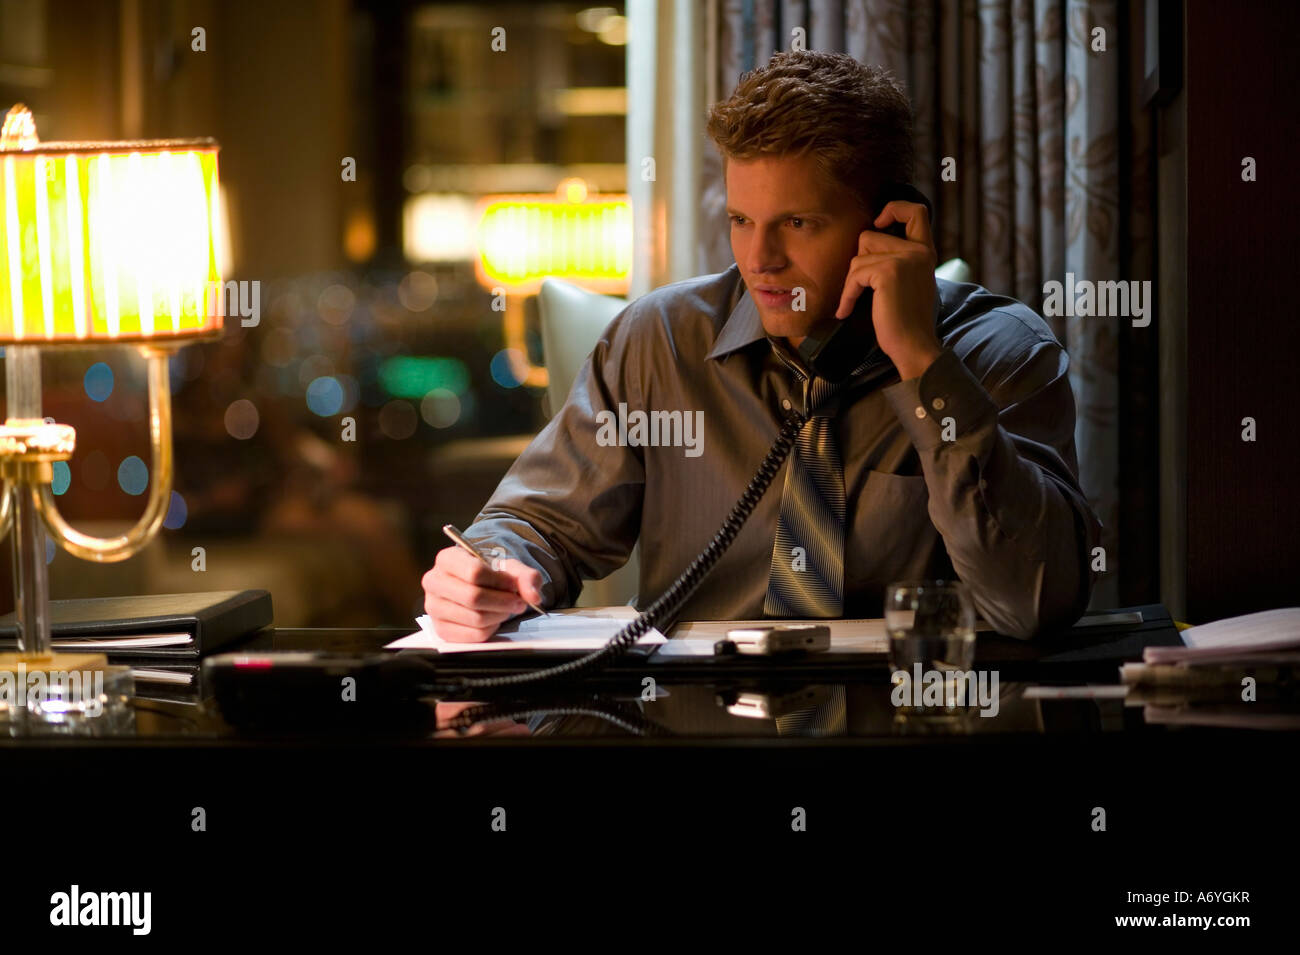 Businessman sitting at a desk and using a telephone Stock Photo